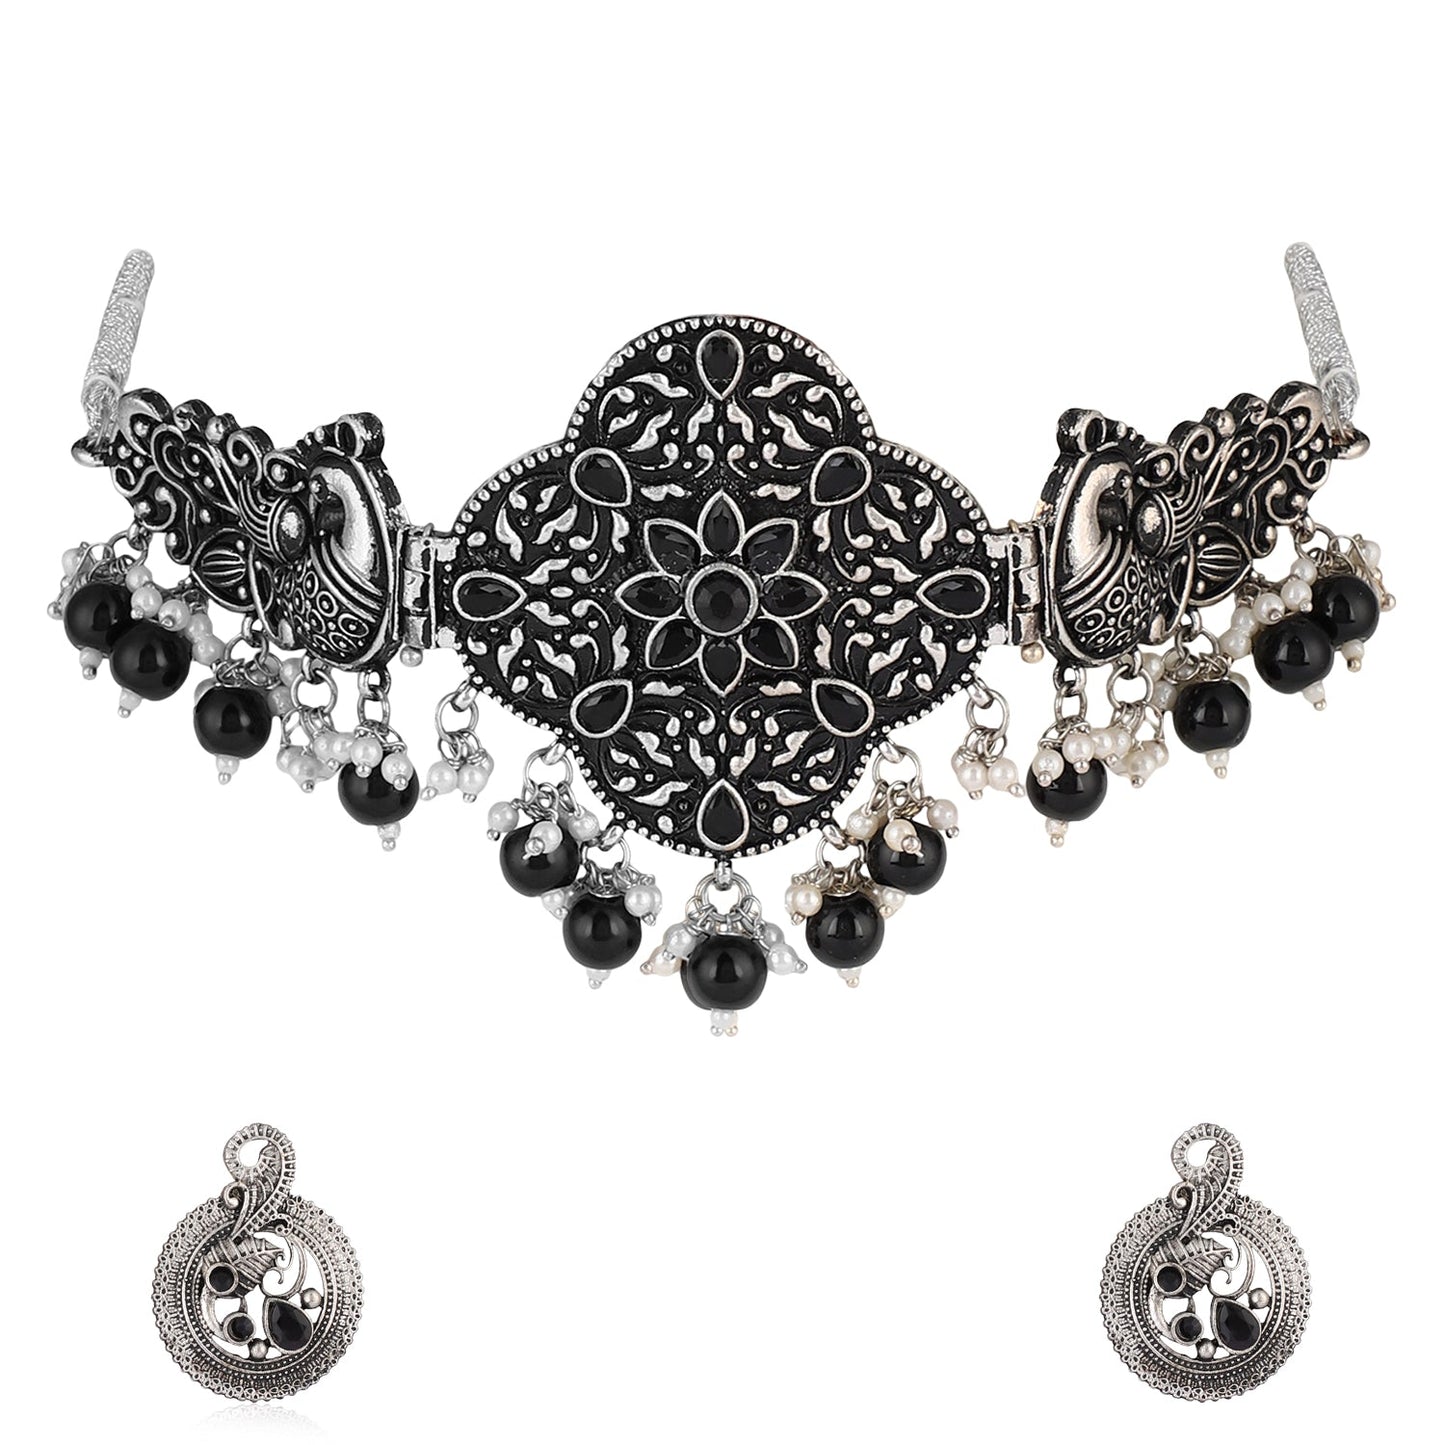 Traditional Choker Necklace with Earrings | Buy This Necklace Online from Mekkna